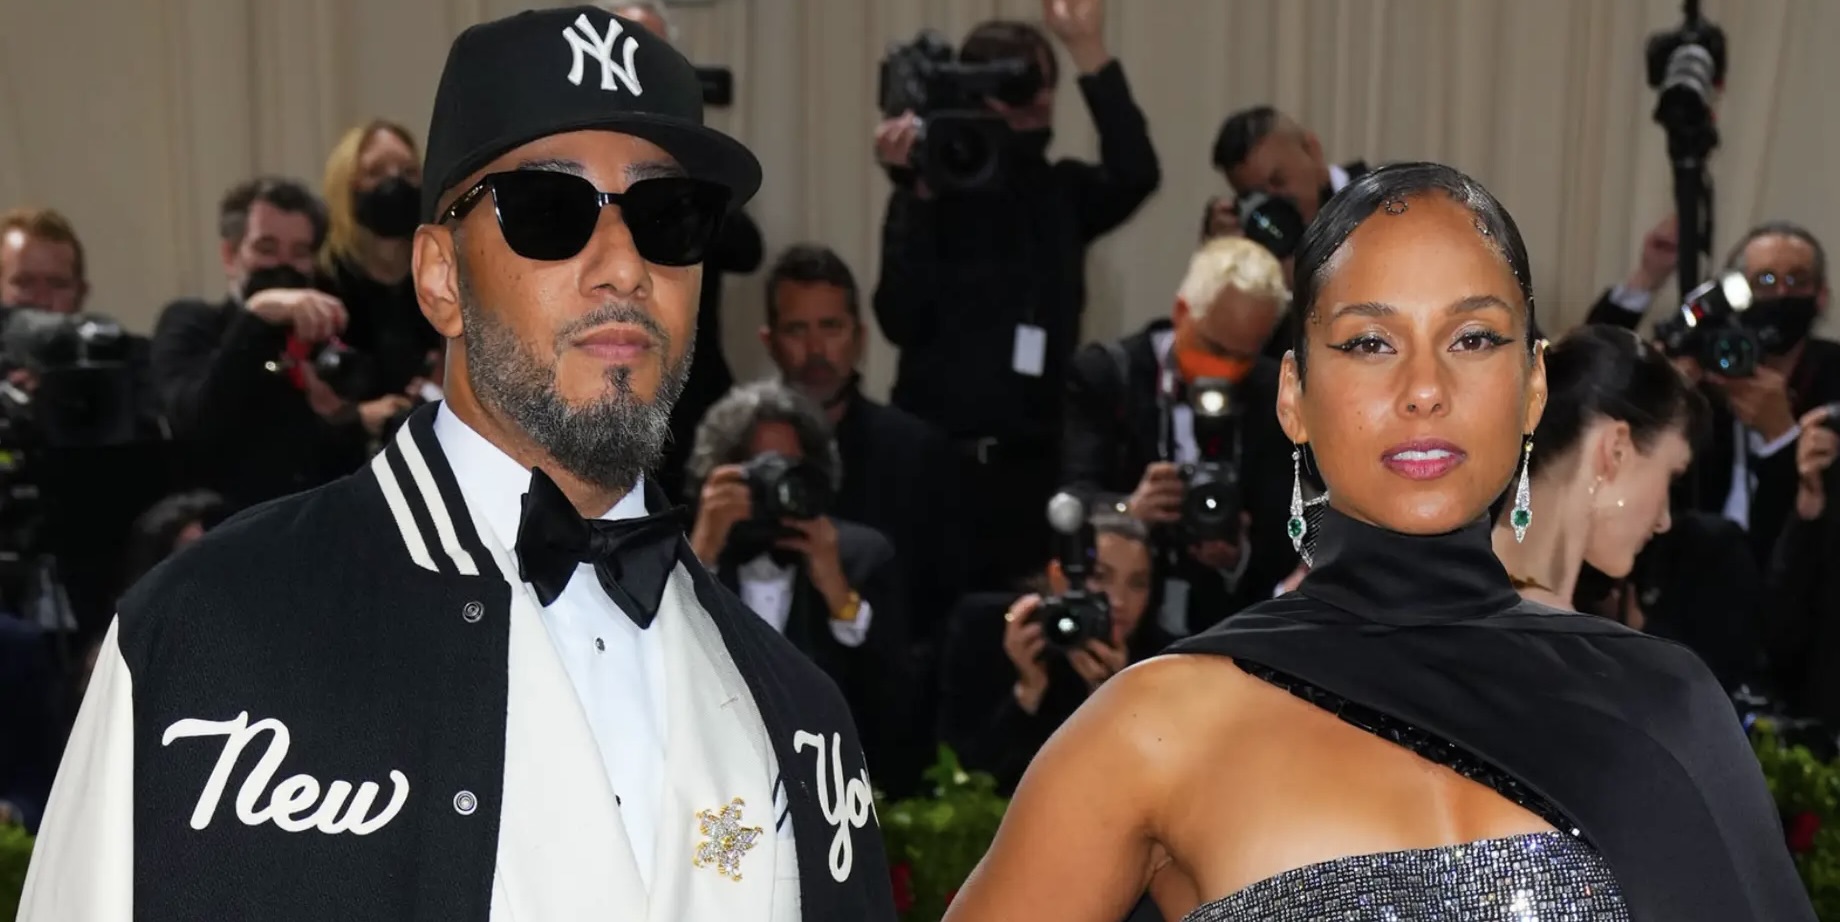 Swizz Beatz And Alicia Keys Announced They Will Bring Their Rare Art Collection To The Brooklyn Museum